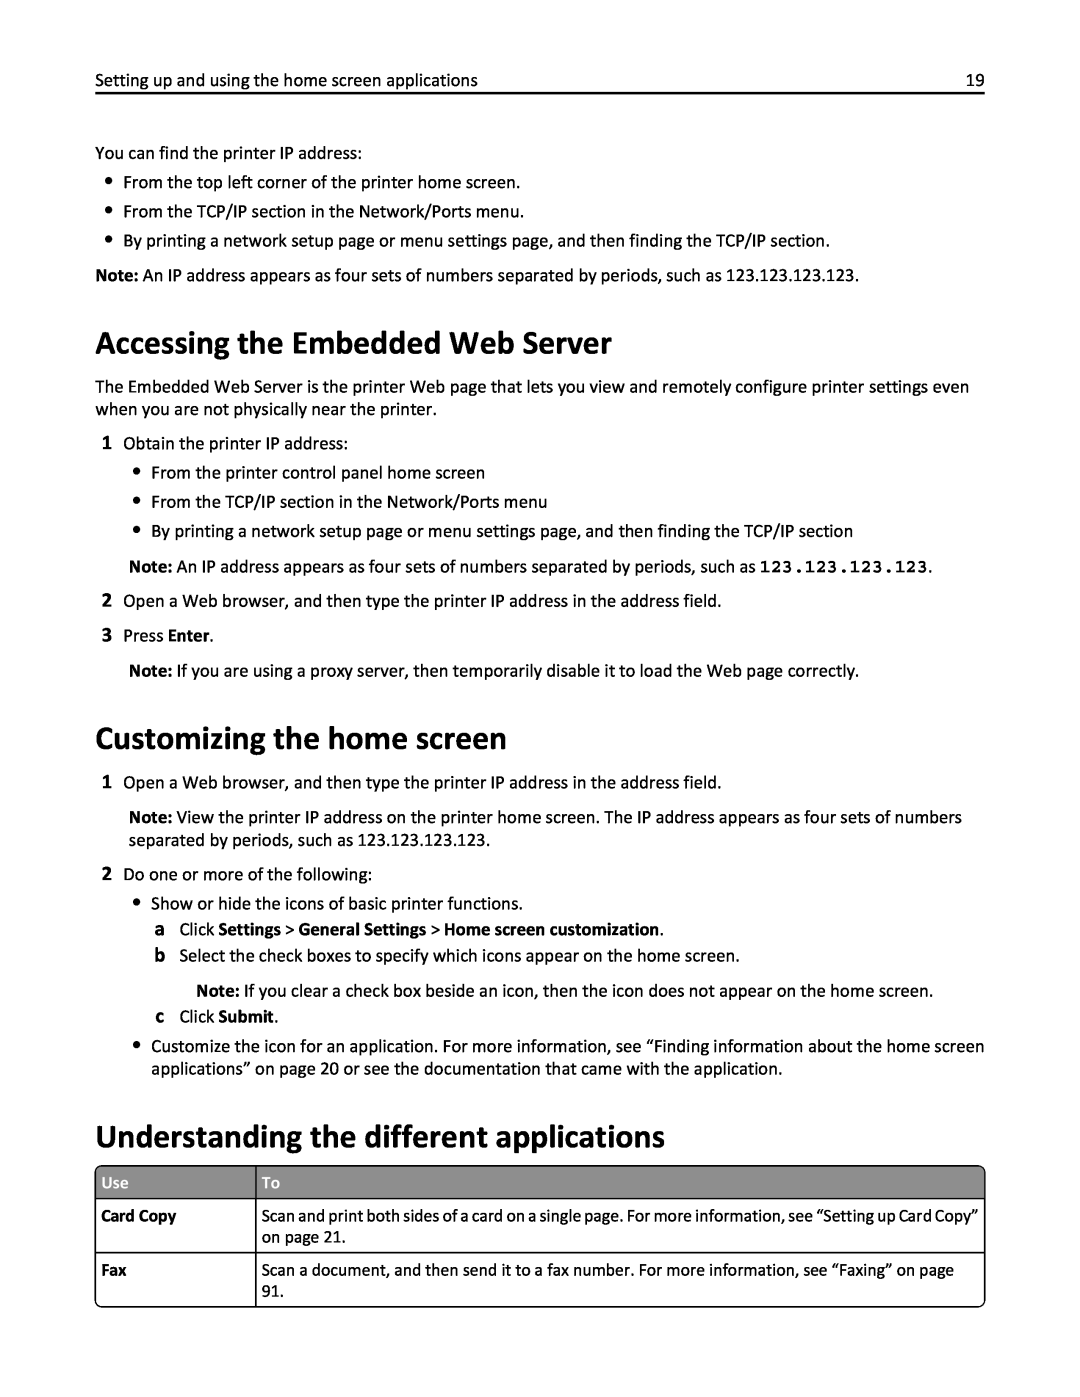 Lexmark 436 manual Accessing the Embedded Web Server, Customizing the home screen, Understanding the different applications 